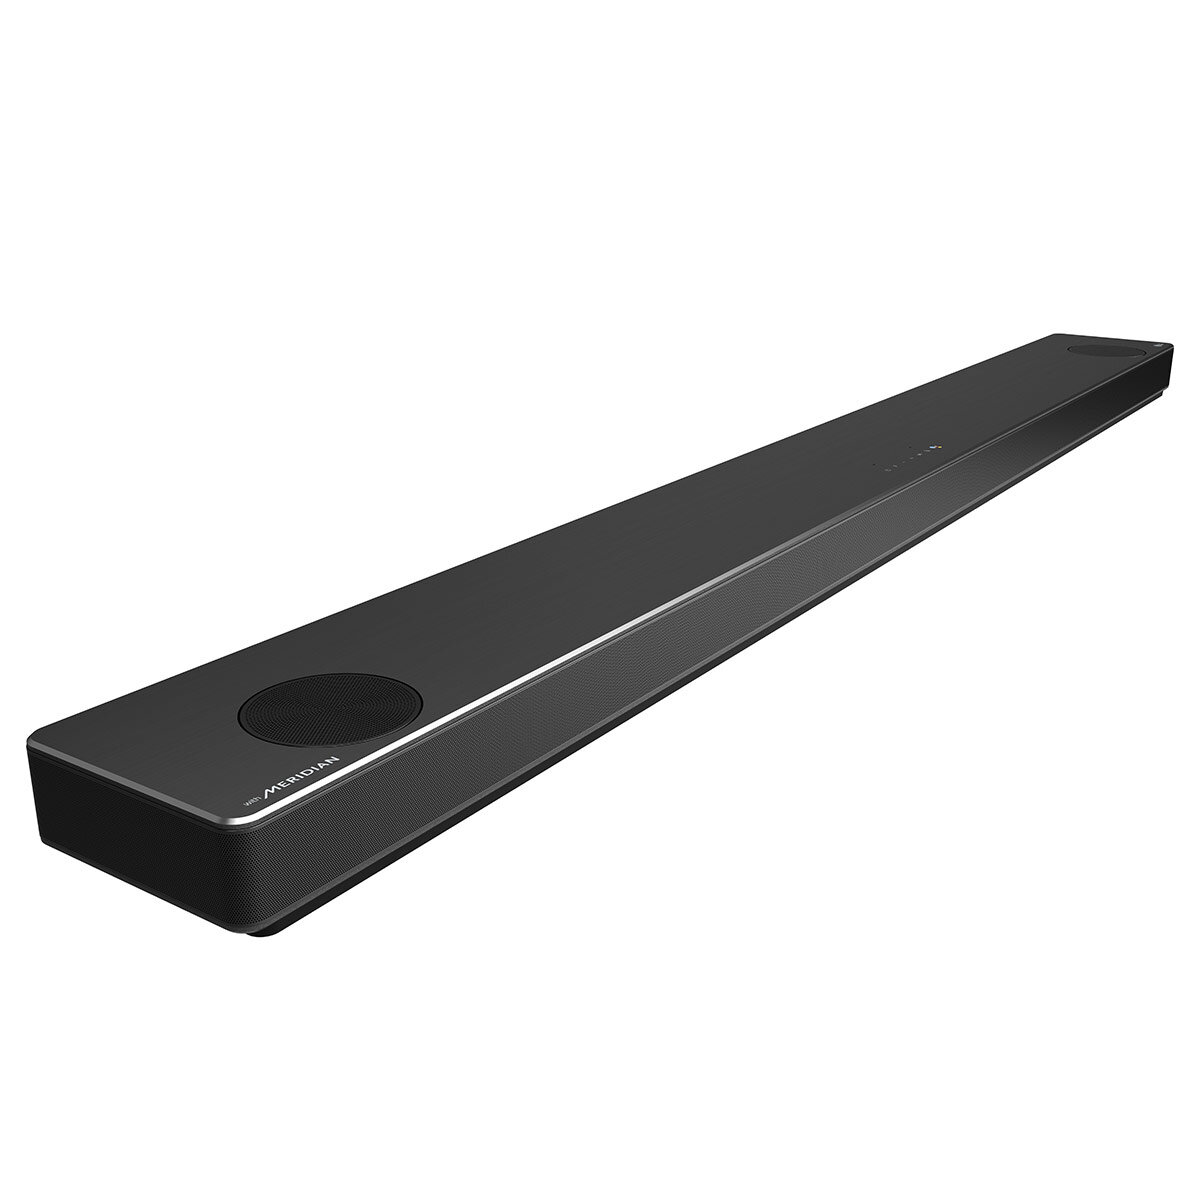 Buy LG SN11RG 7.1.4CH Wireless Soundbar with Subwoofer at costco.co.uk